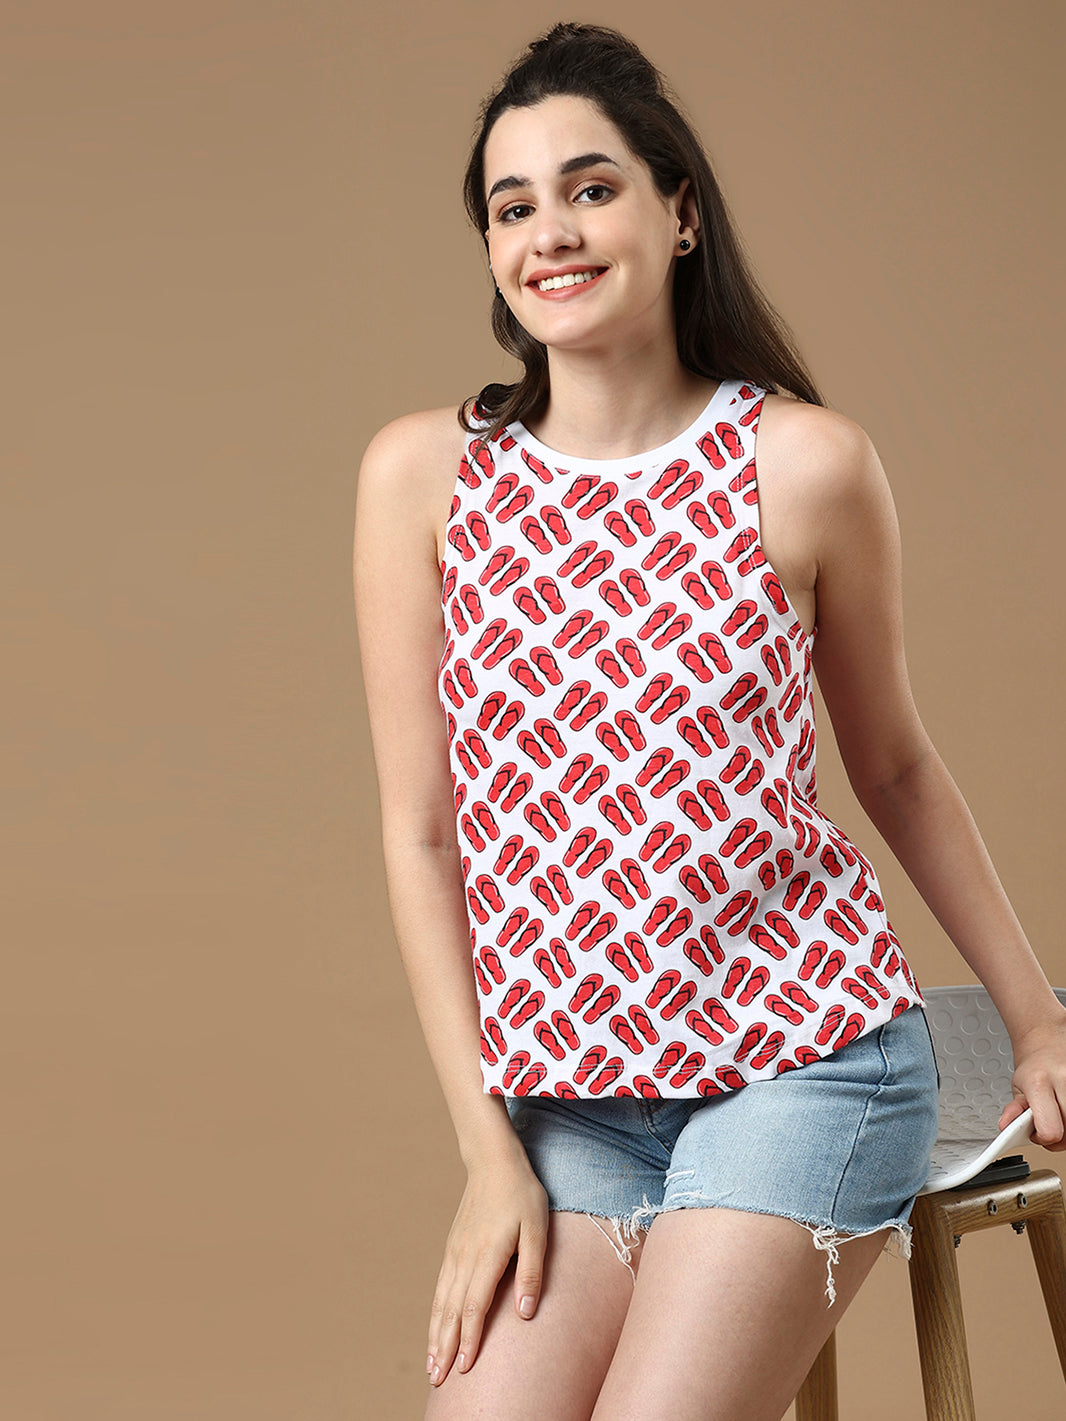 Women Red and White Printed Sleeveless Cotton Top